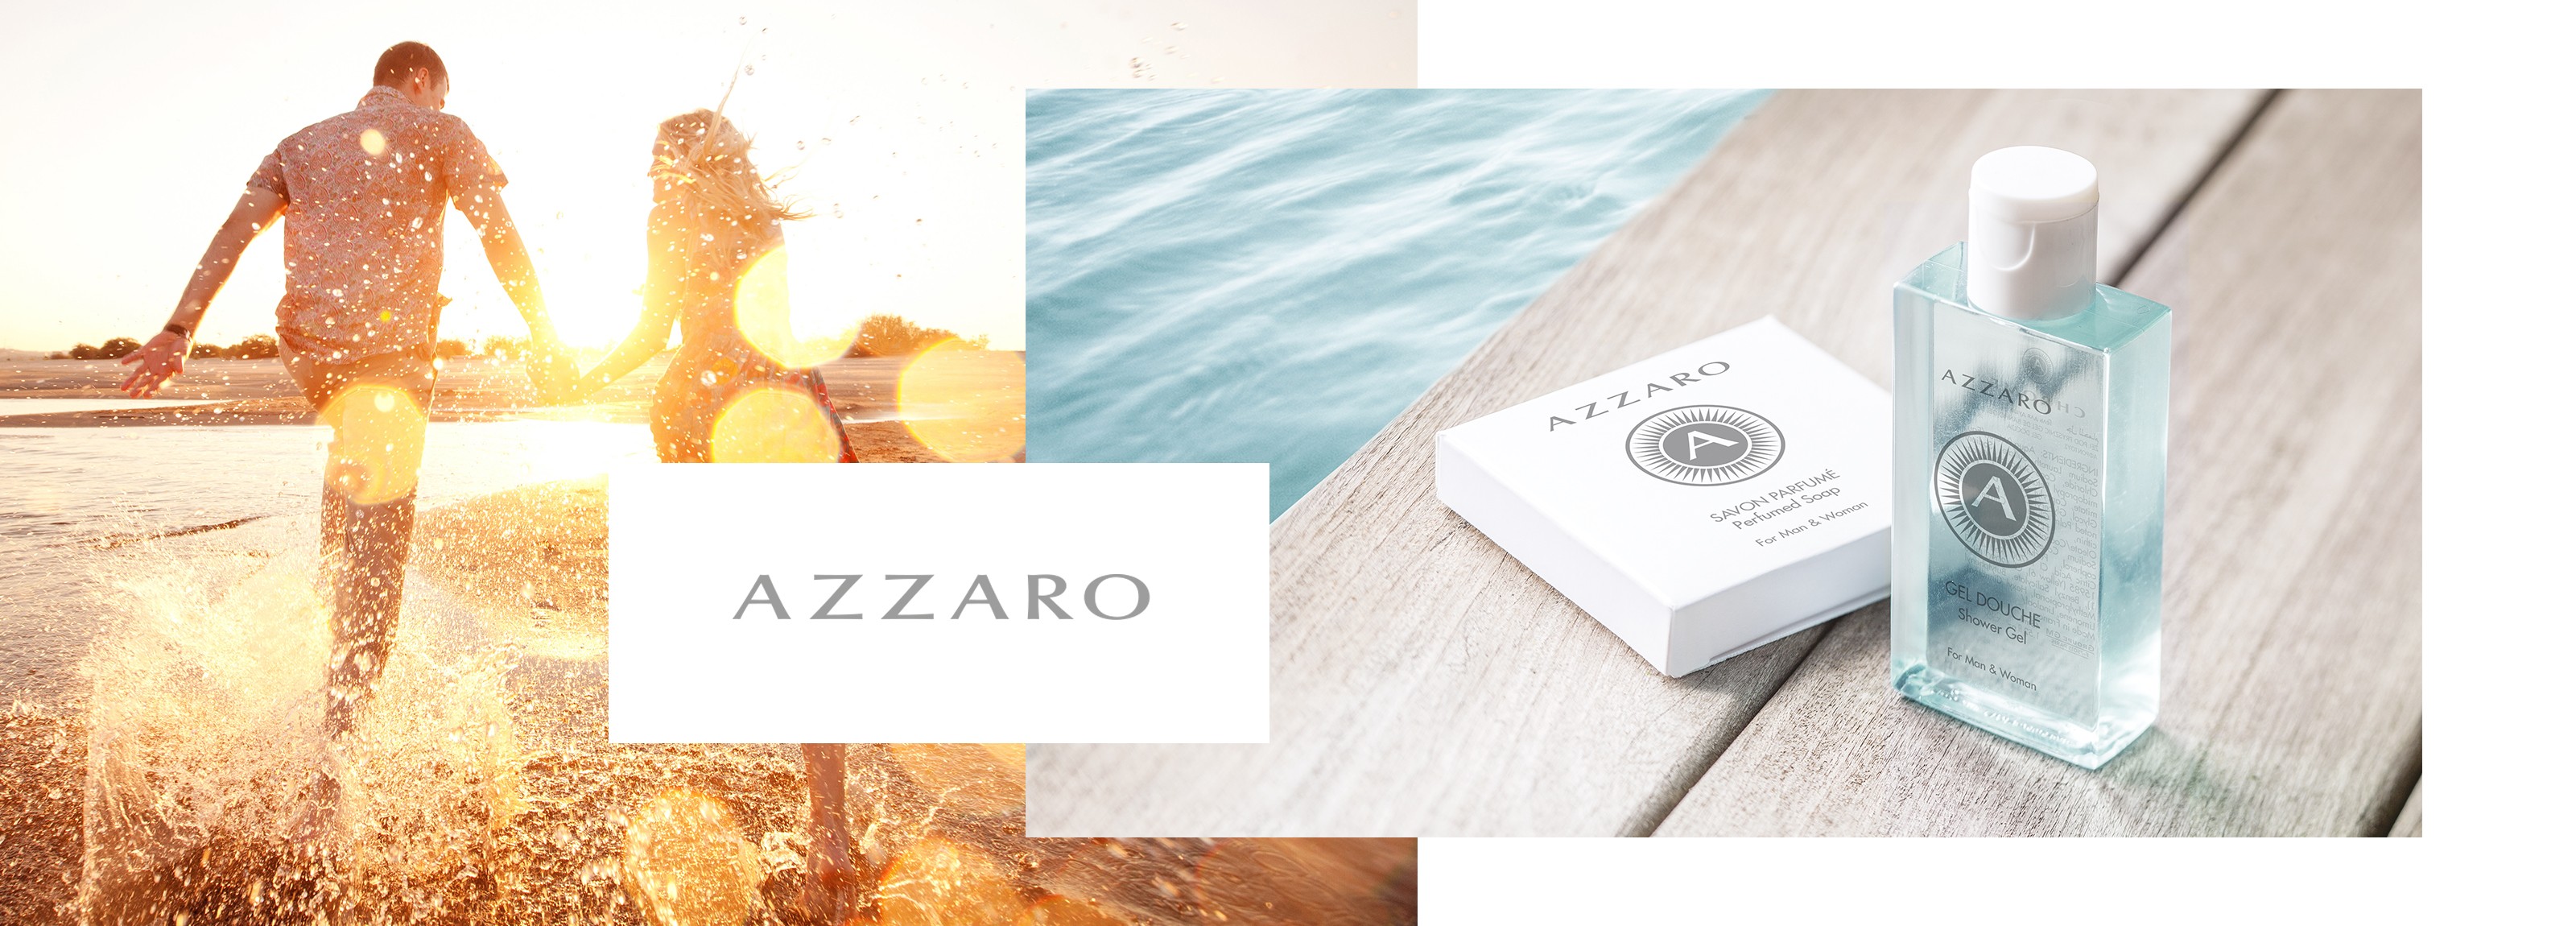 azzaro bathroom products and logo with people running through water